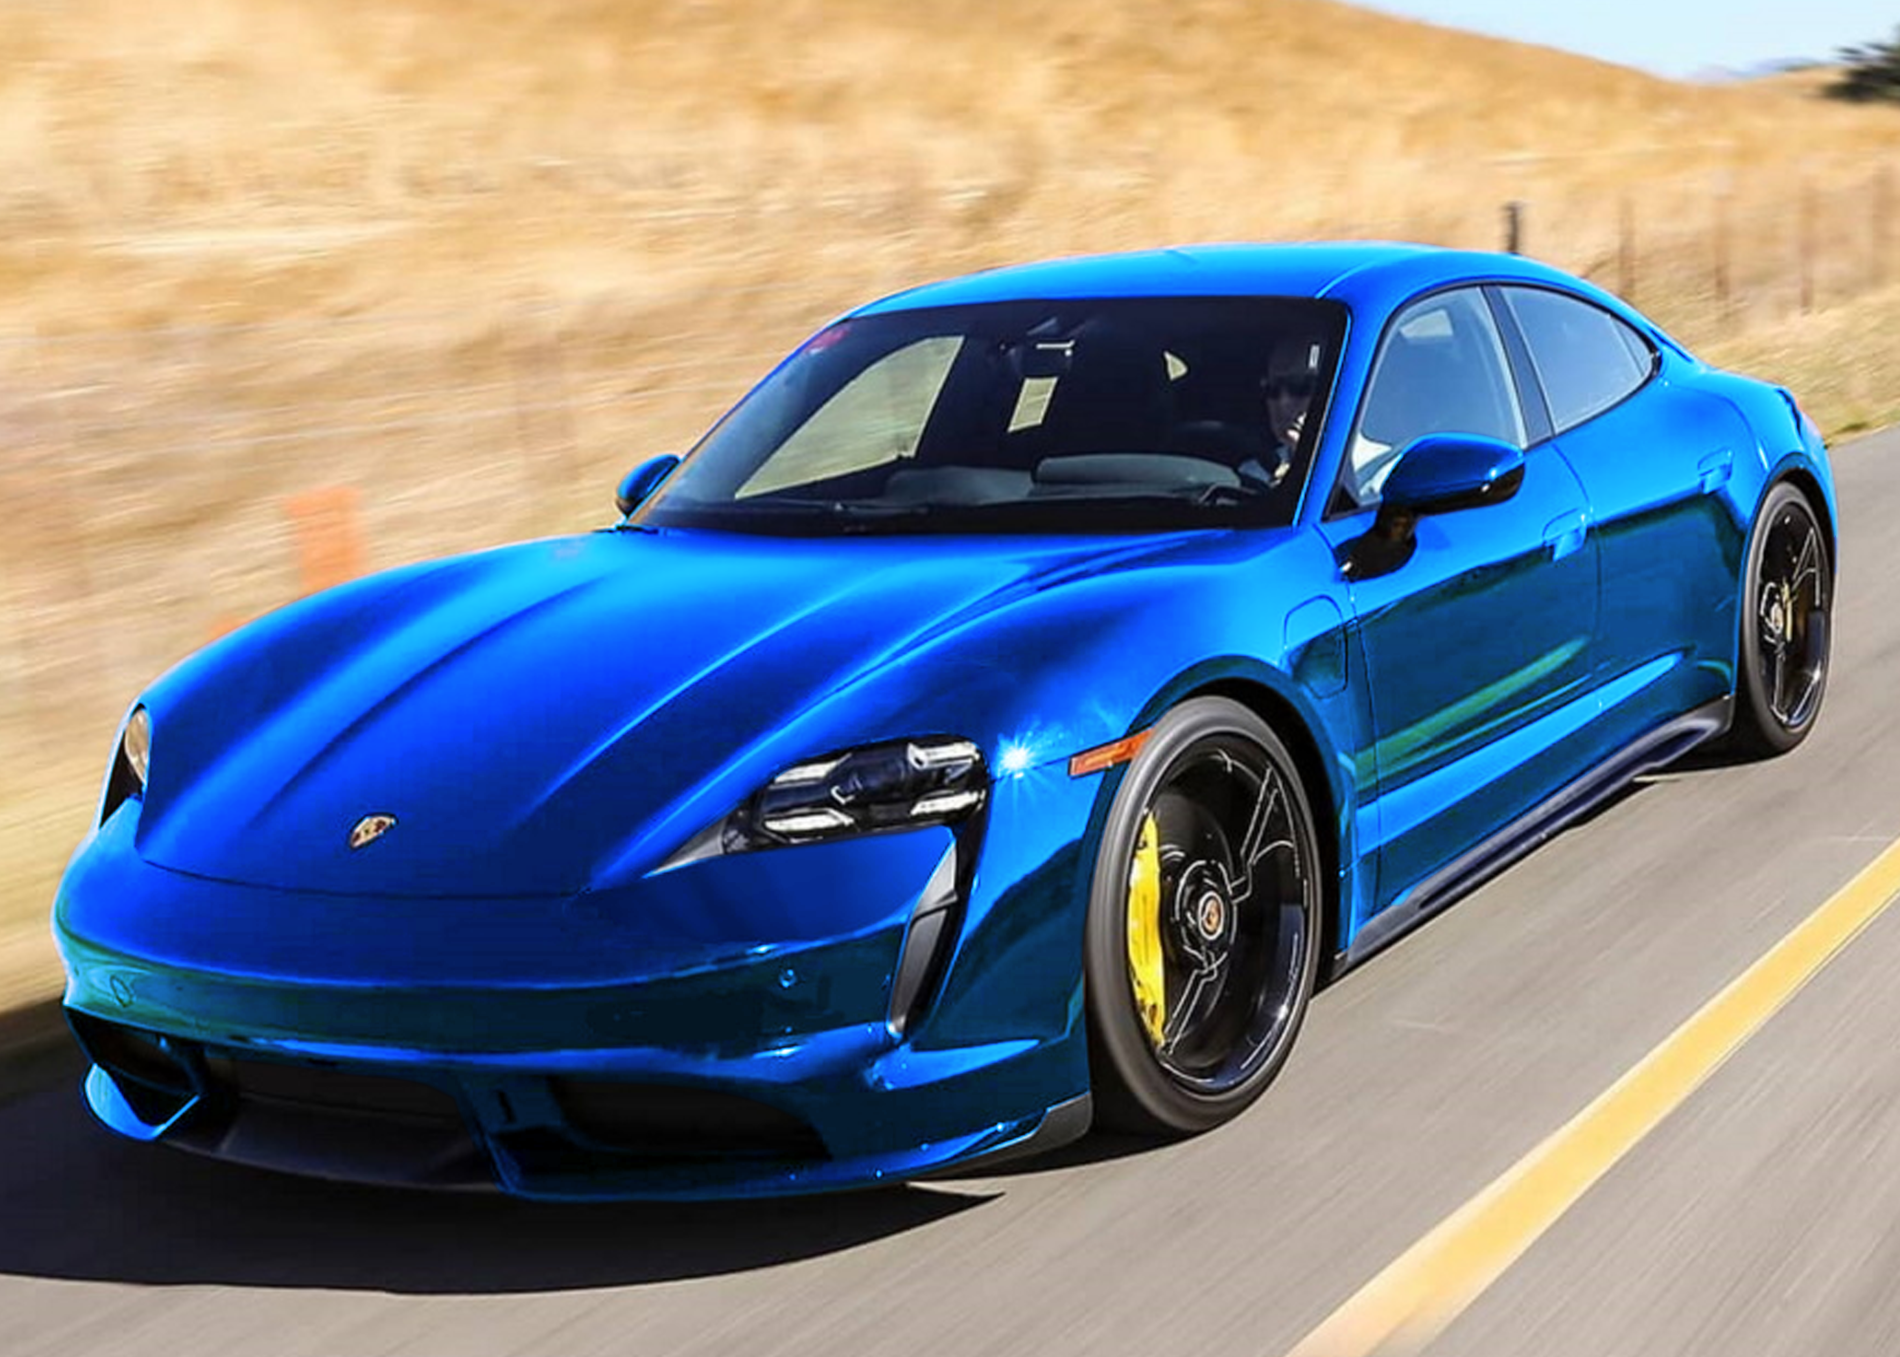 Porsche Taycan Possible Taycan color options........... Tay saphire blue